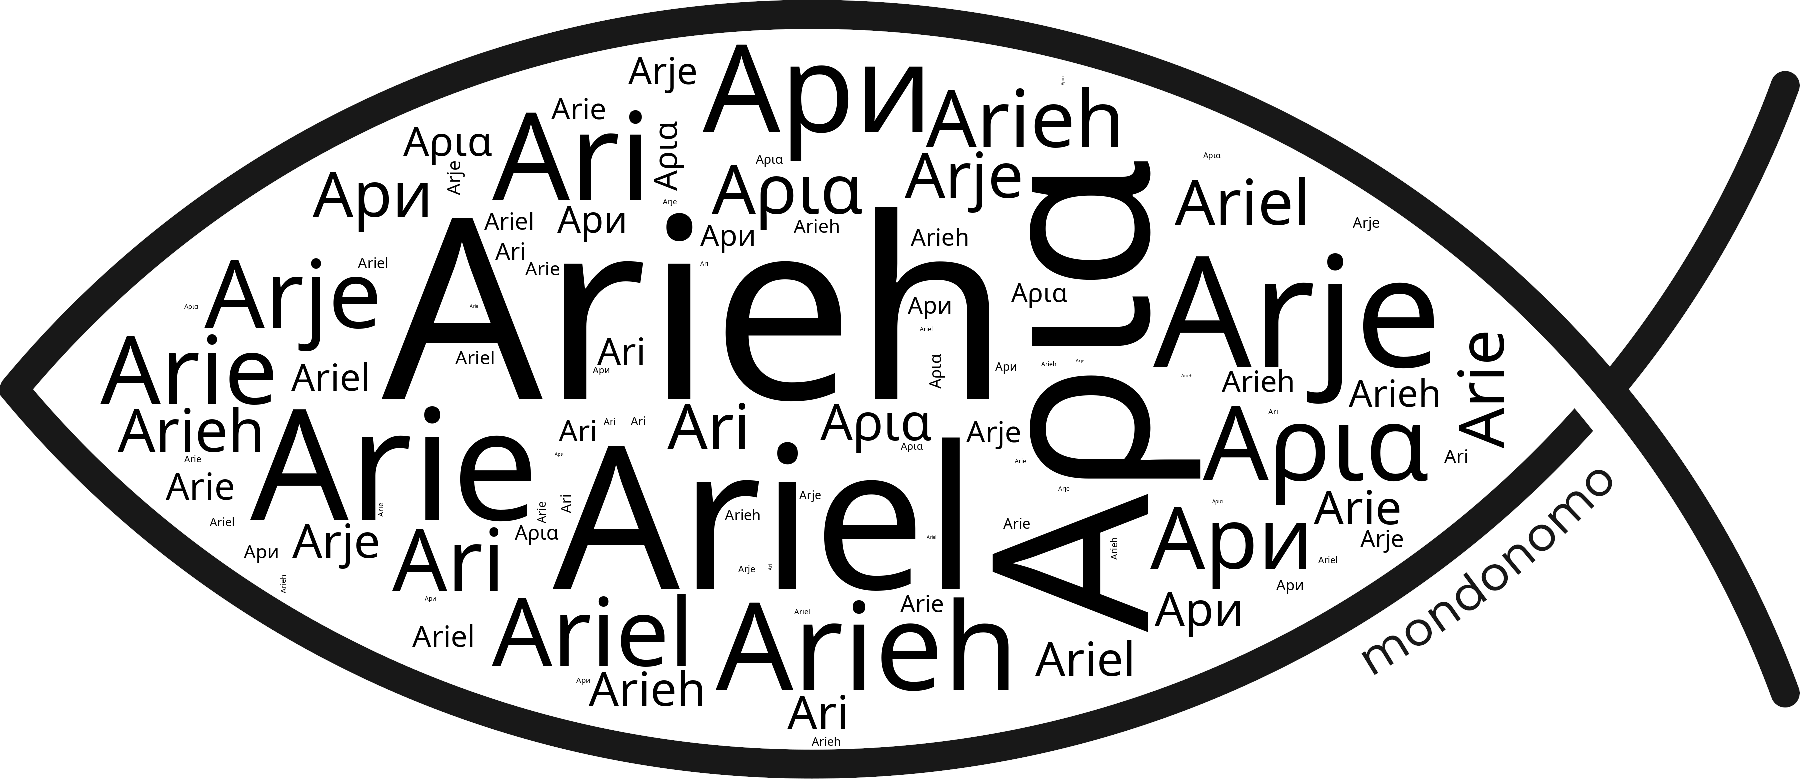 Name Arieh in the world's Bibles